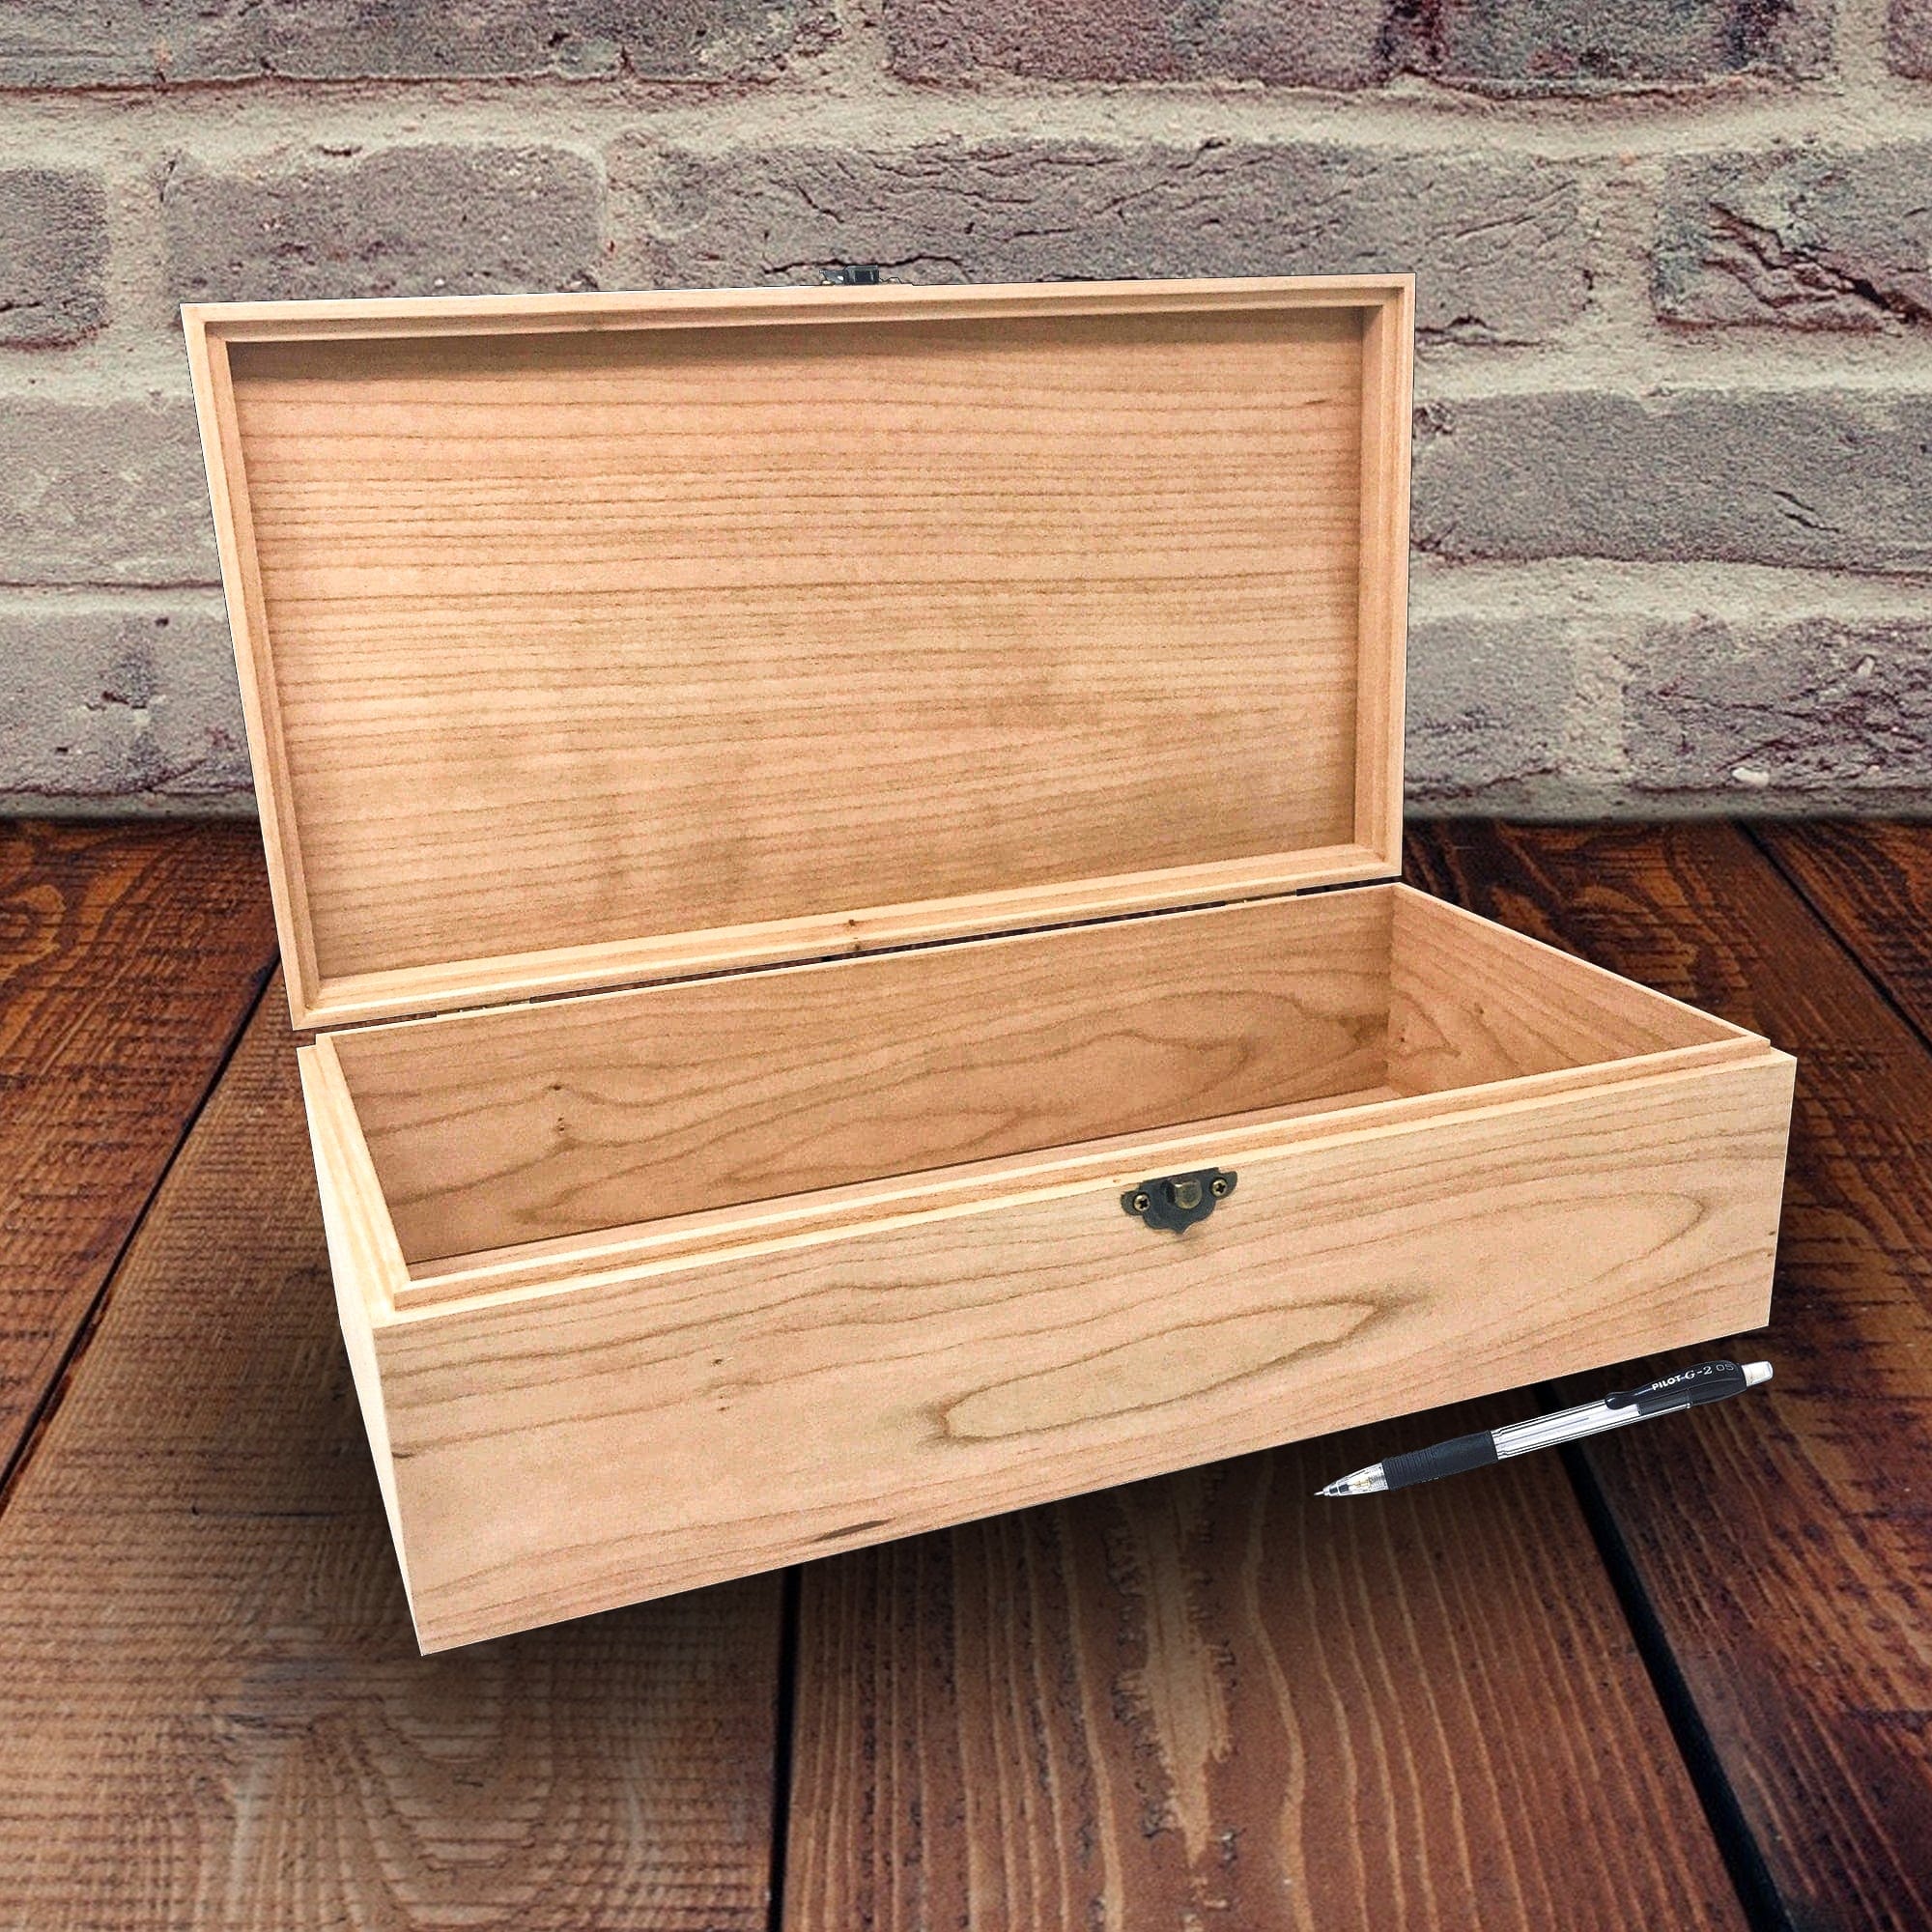 Unfinished Wooden Hinged Craft Box, 7 x 7